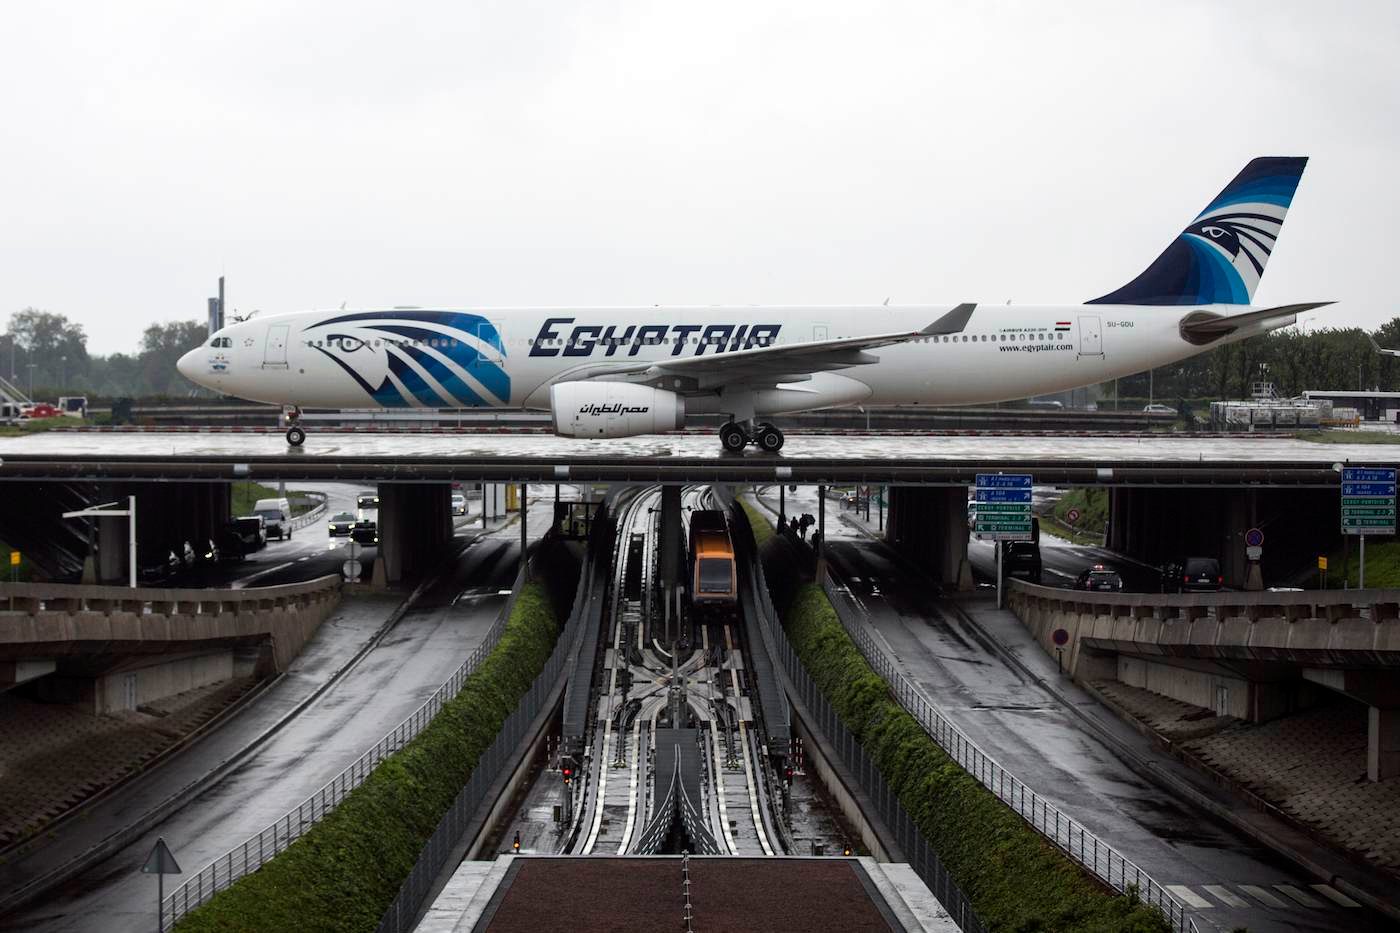 Body part, seats, luggage found in EgyptAir search